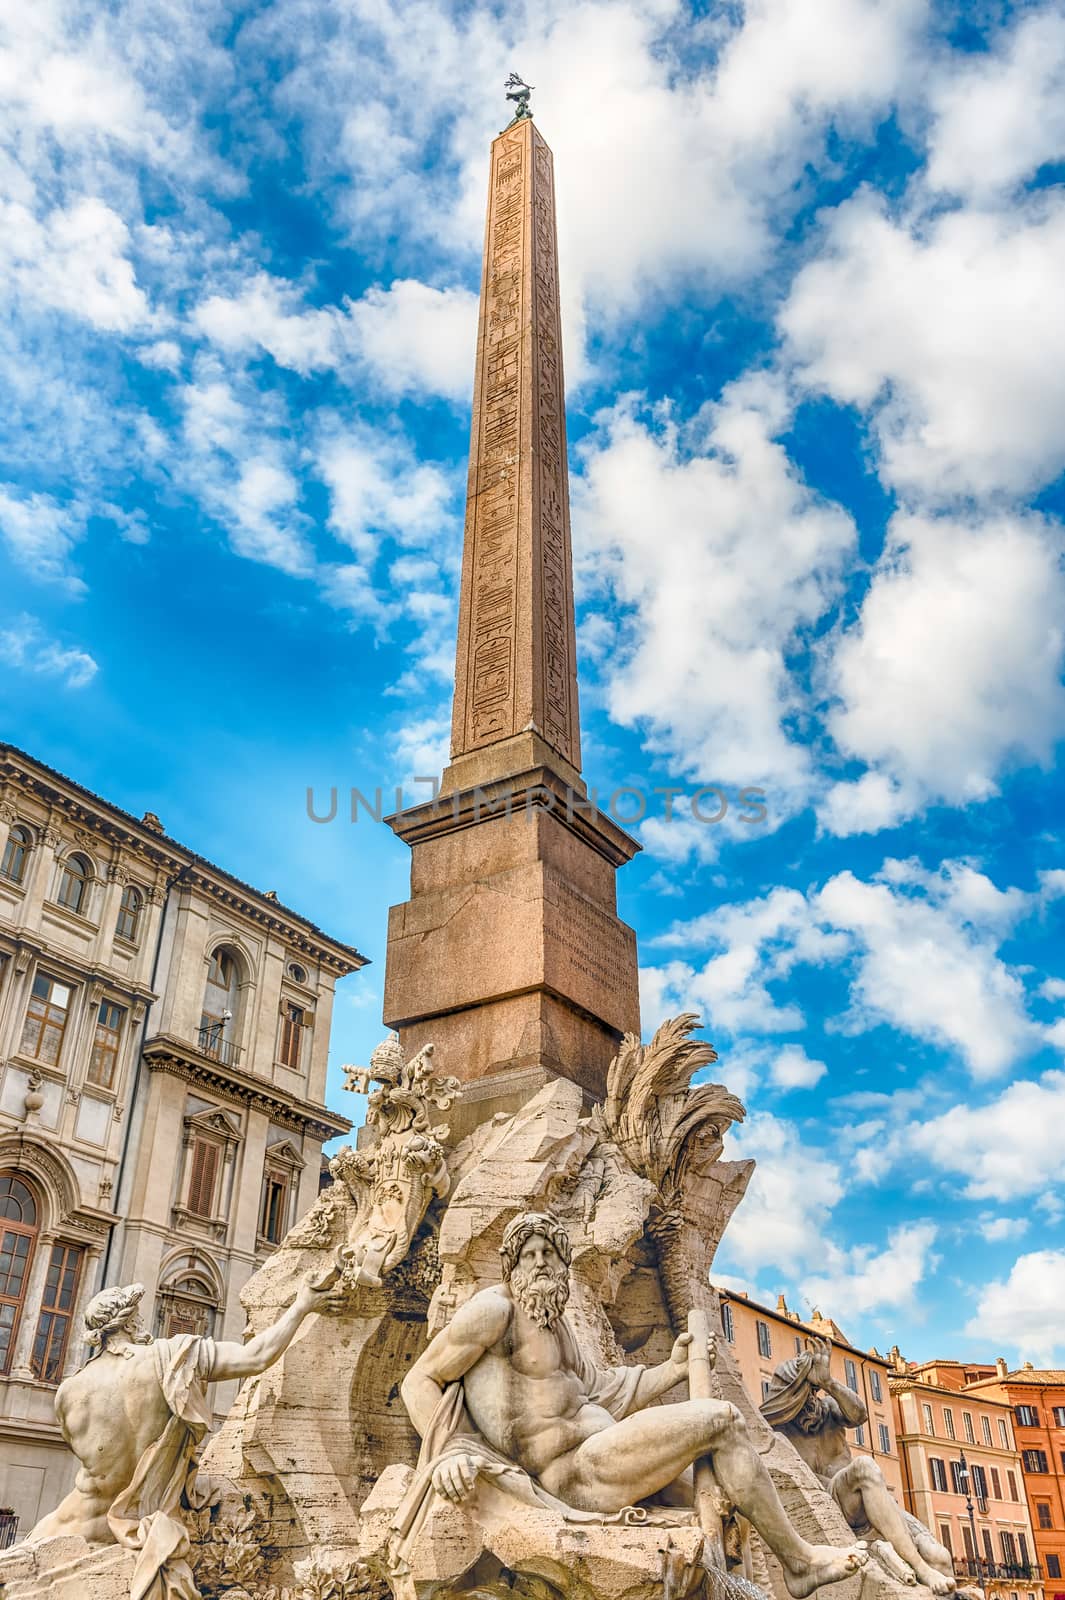 Obelisk and Fountain of the Four Rivers, iconic landmark designed in 1651 by Bernini, located in the famous Piazza Navona, Rome, Italy